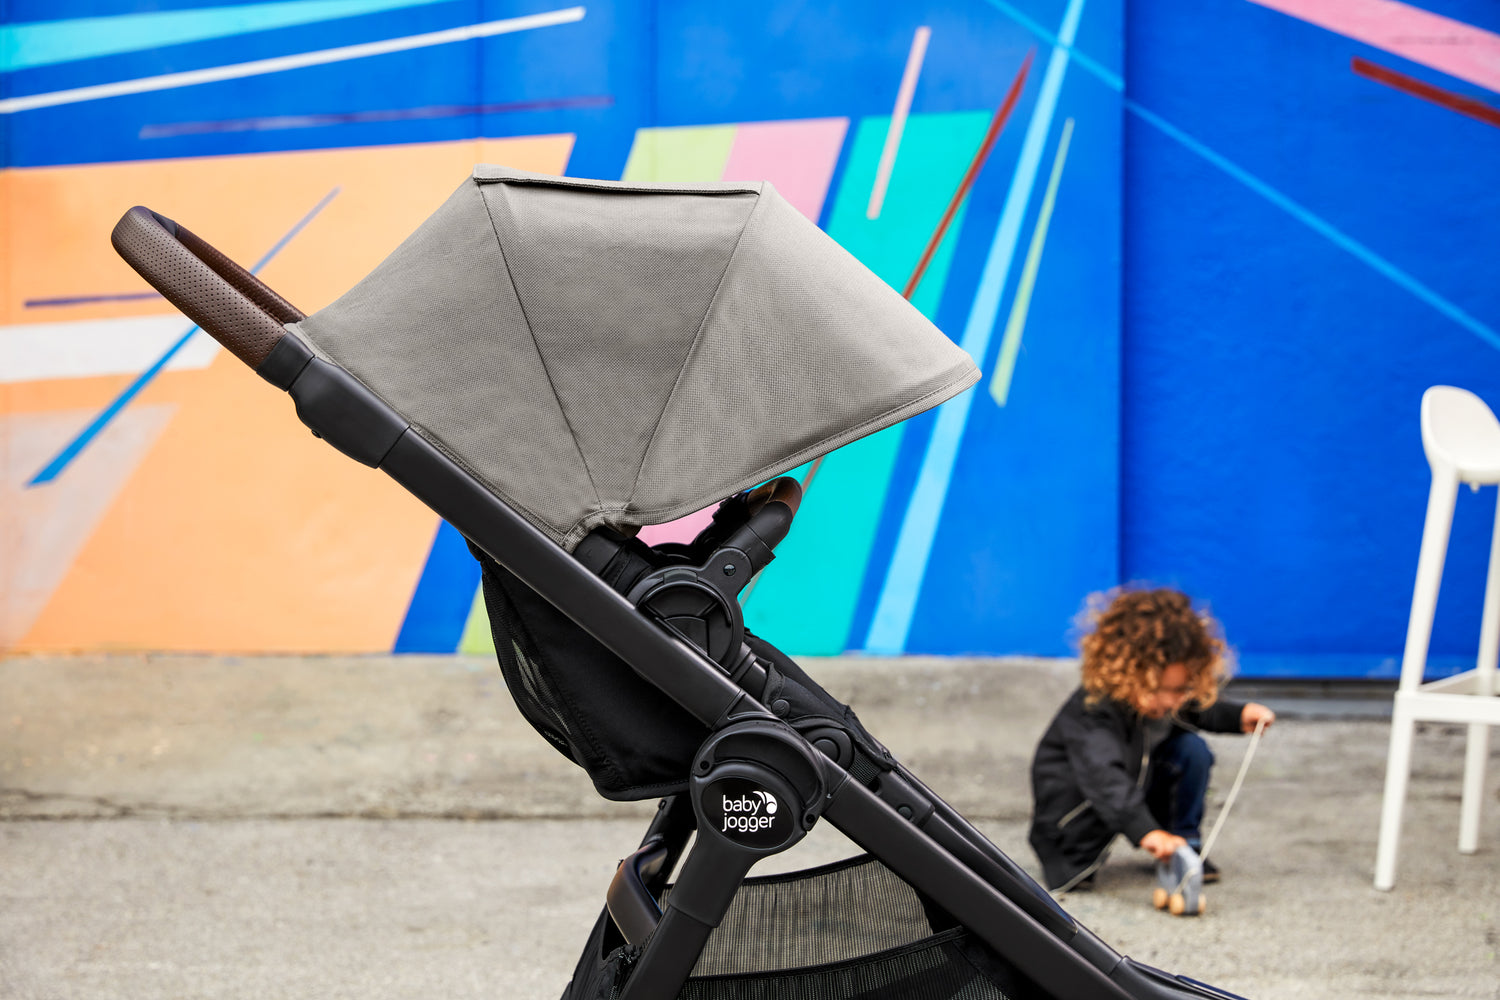 Baby Jogger® strollers